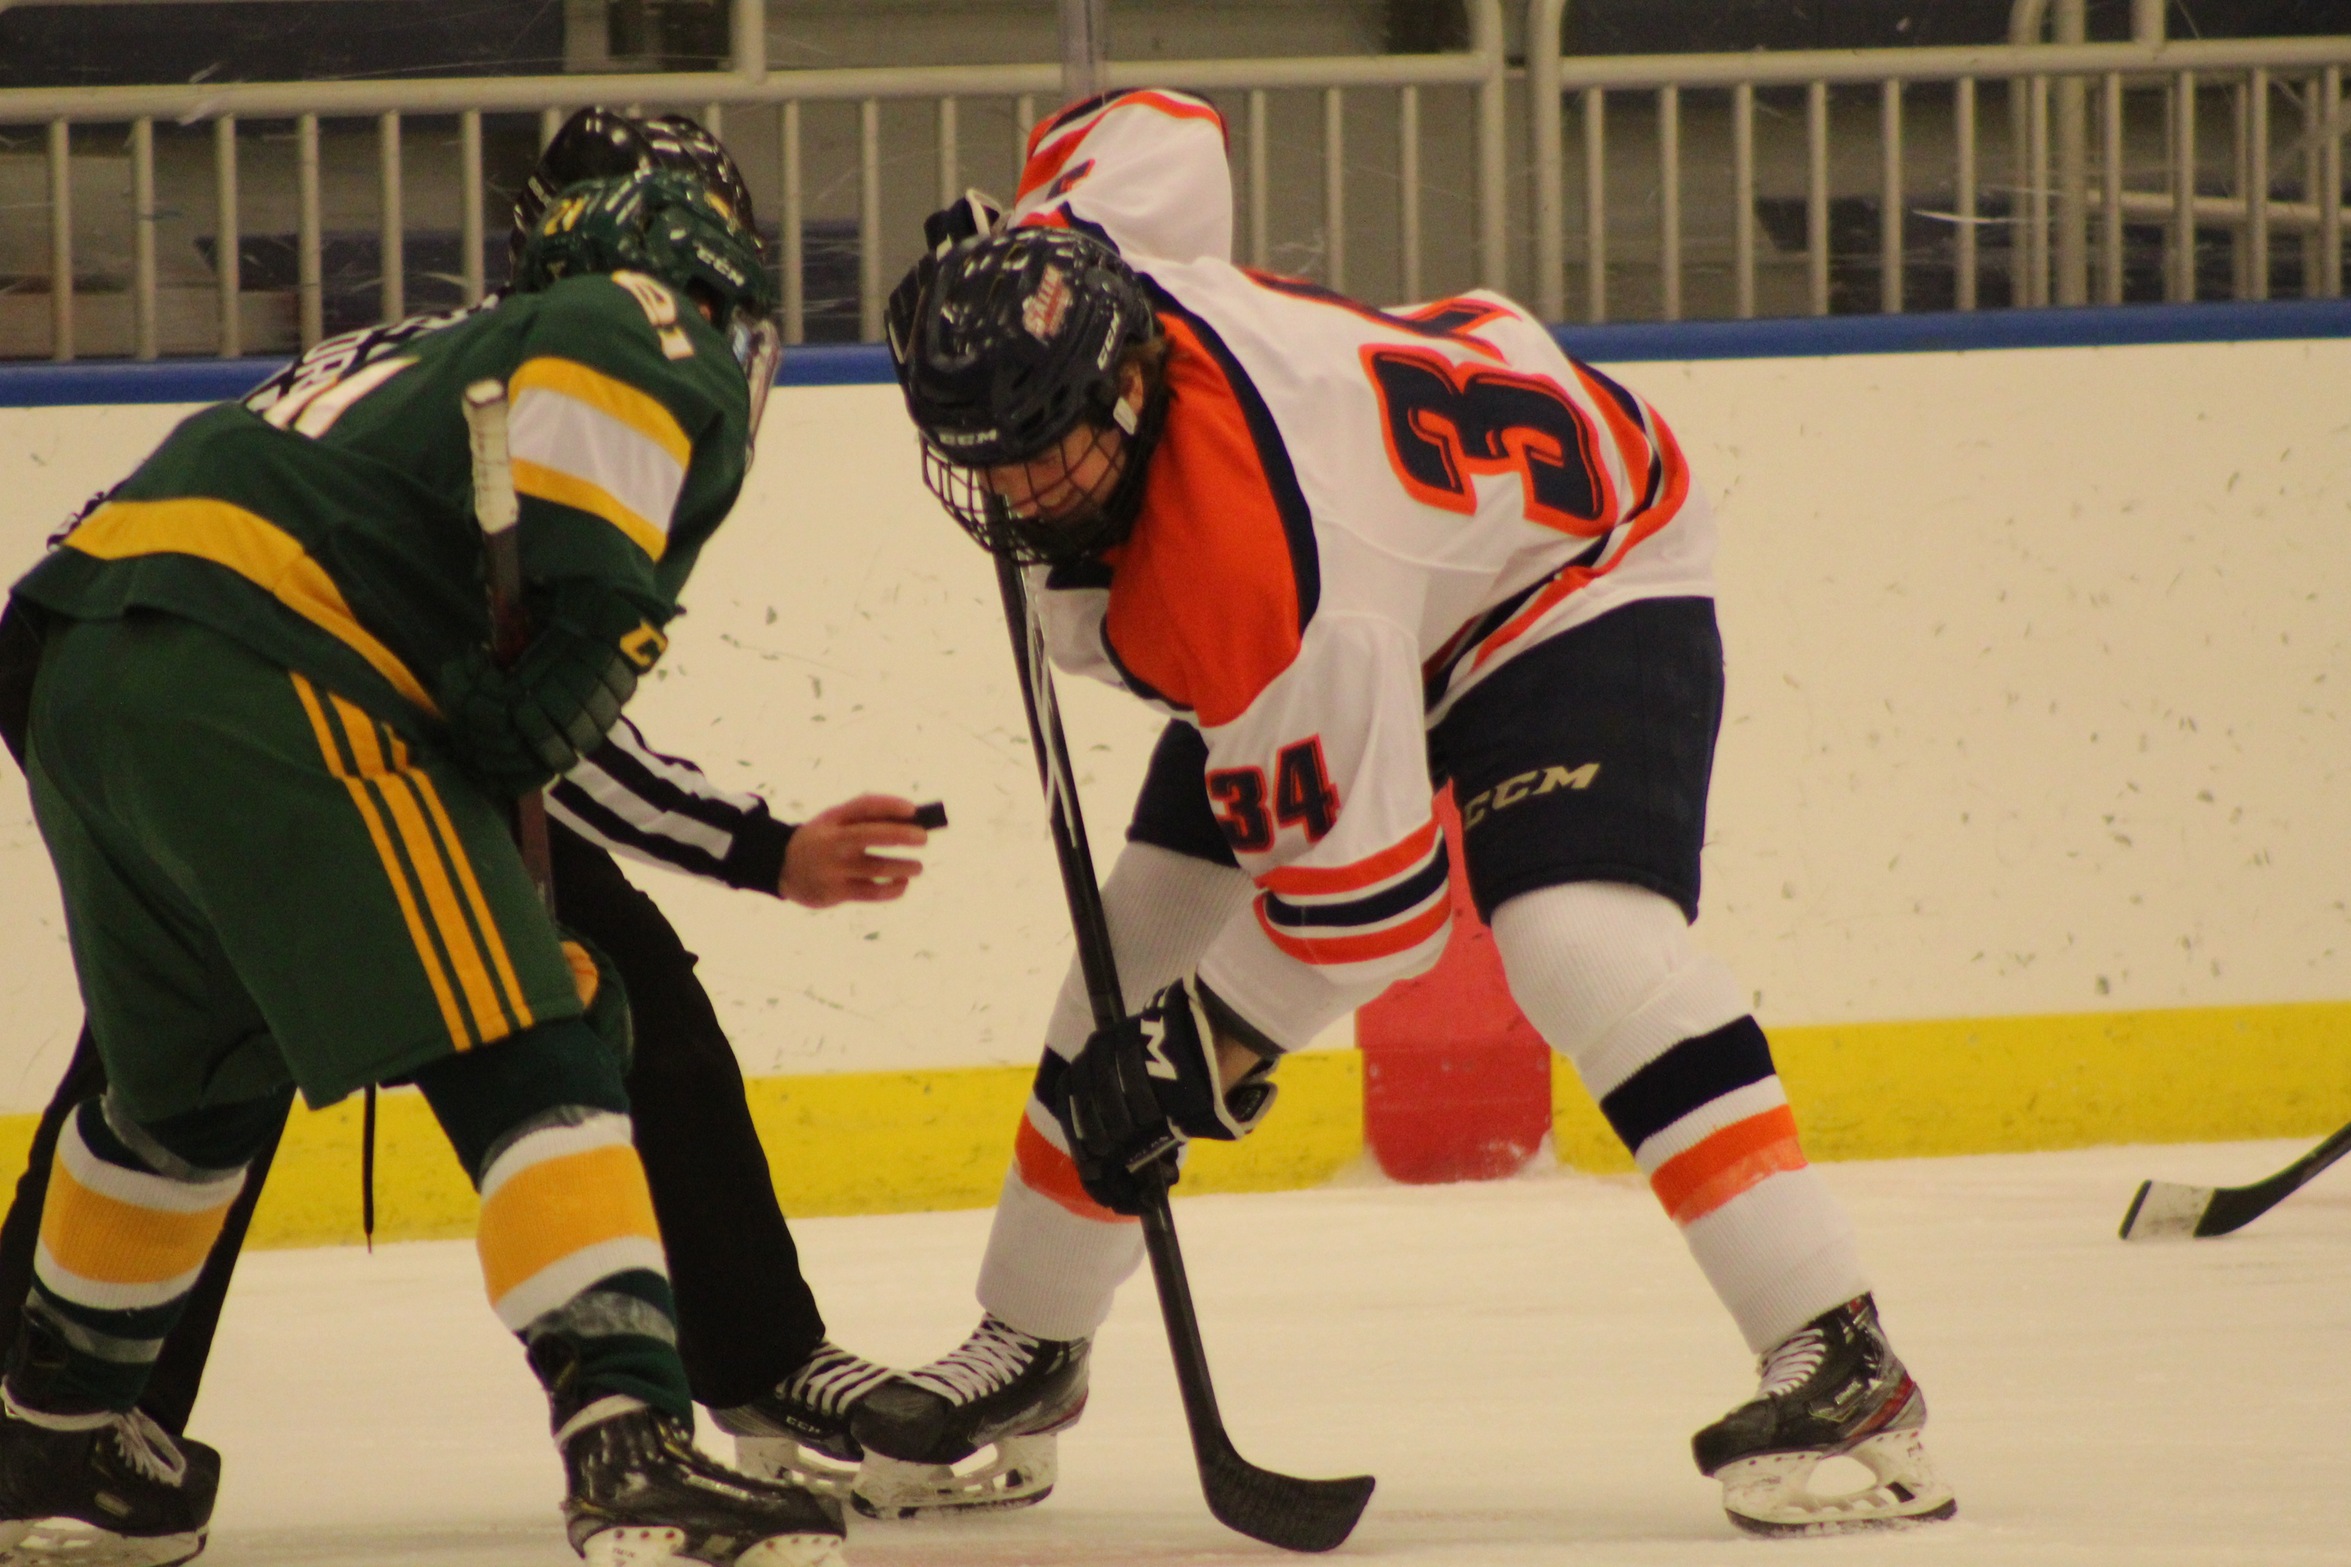 Salem State Loses 5-1 to Fitchburg State